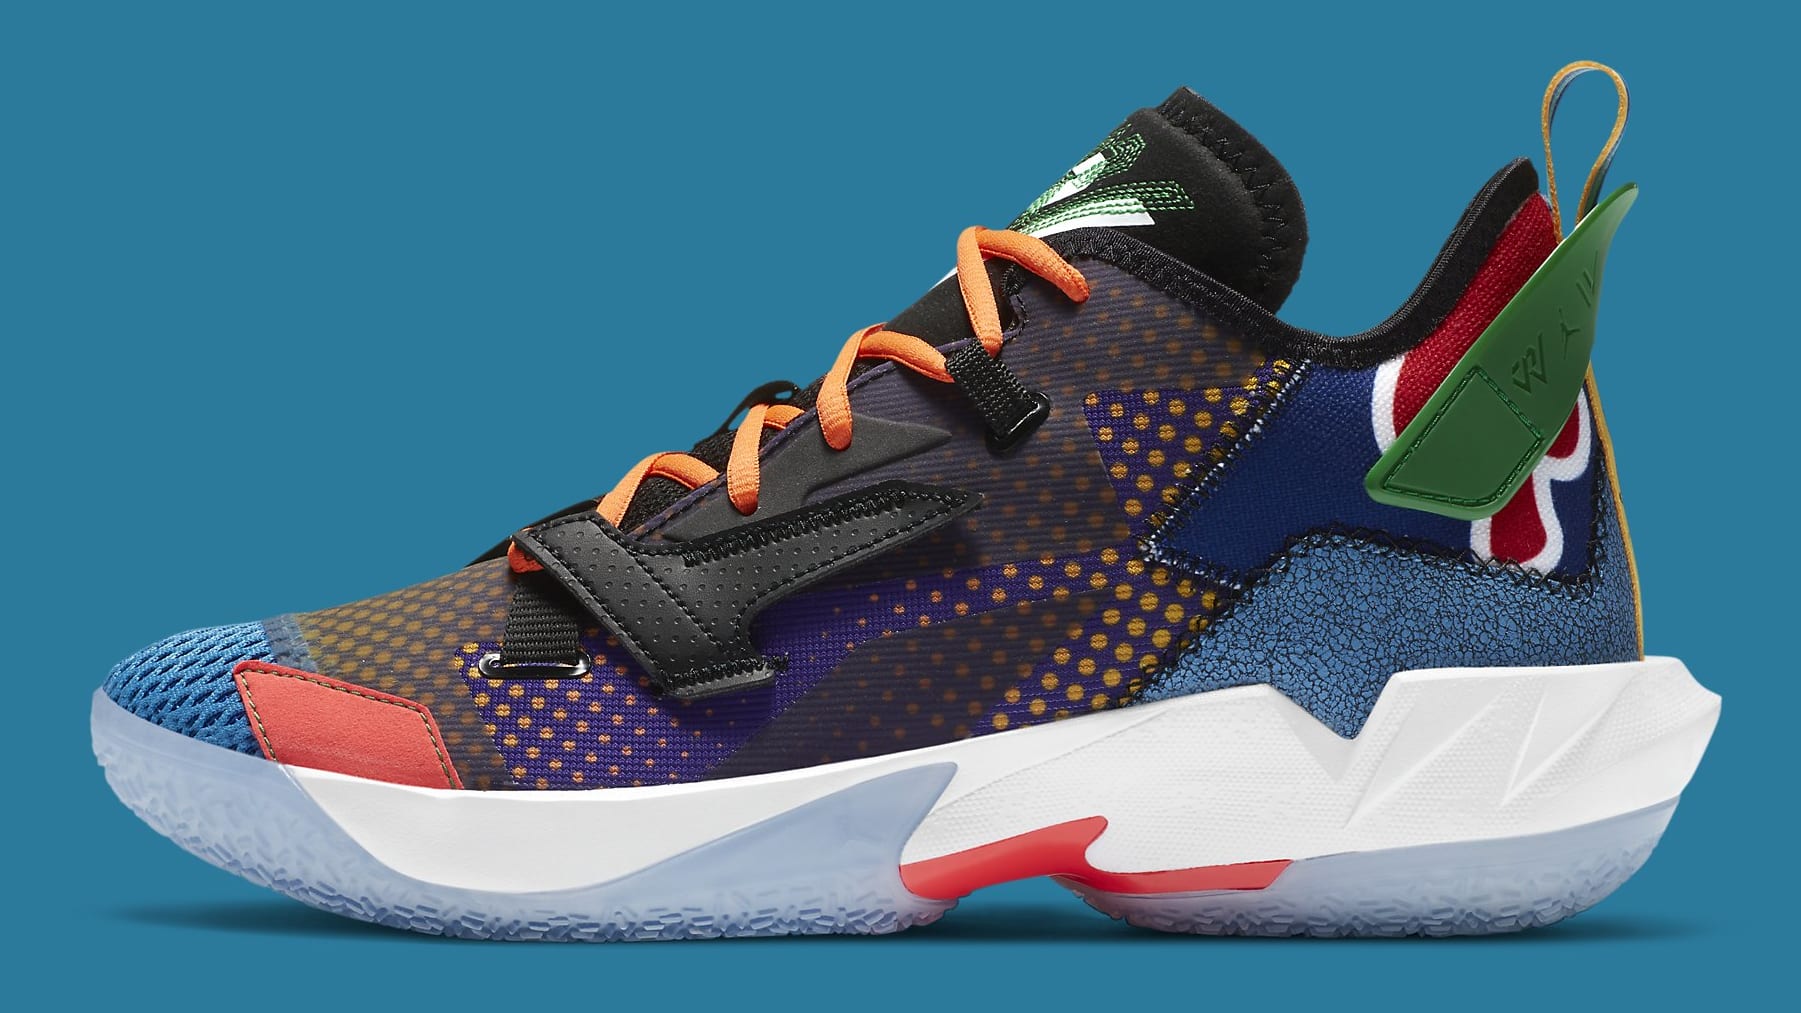 Russell Westbrook's Jordan Why Not Zer0.4 Officially Unveiled